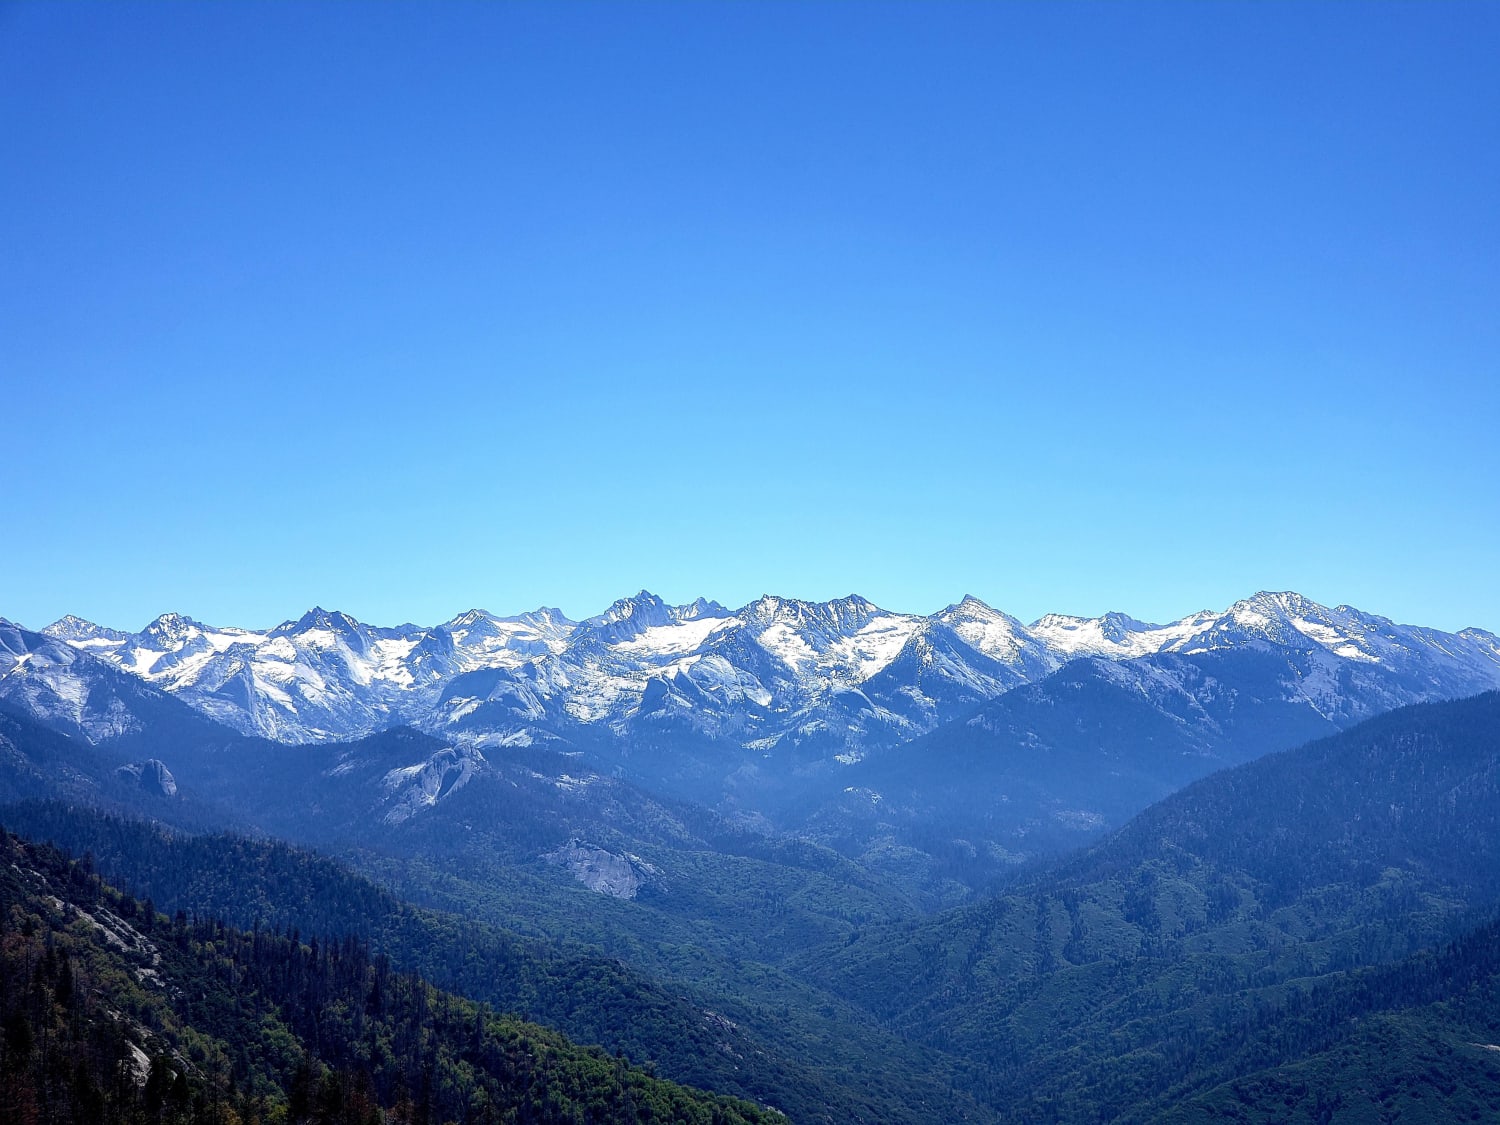 The view from the top of Moro Rock Trail, Sequoia National Park, CA